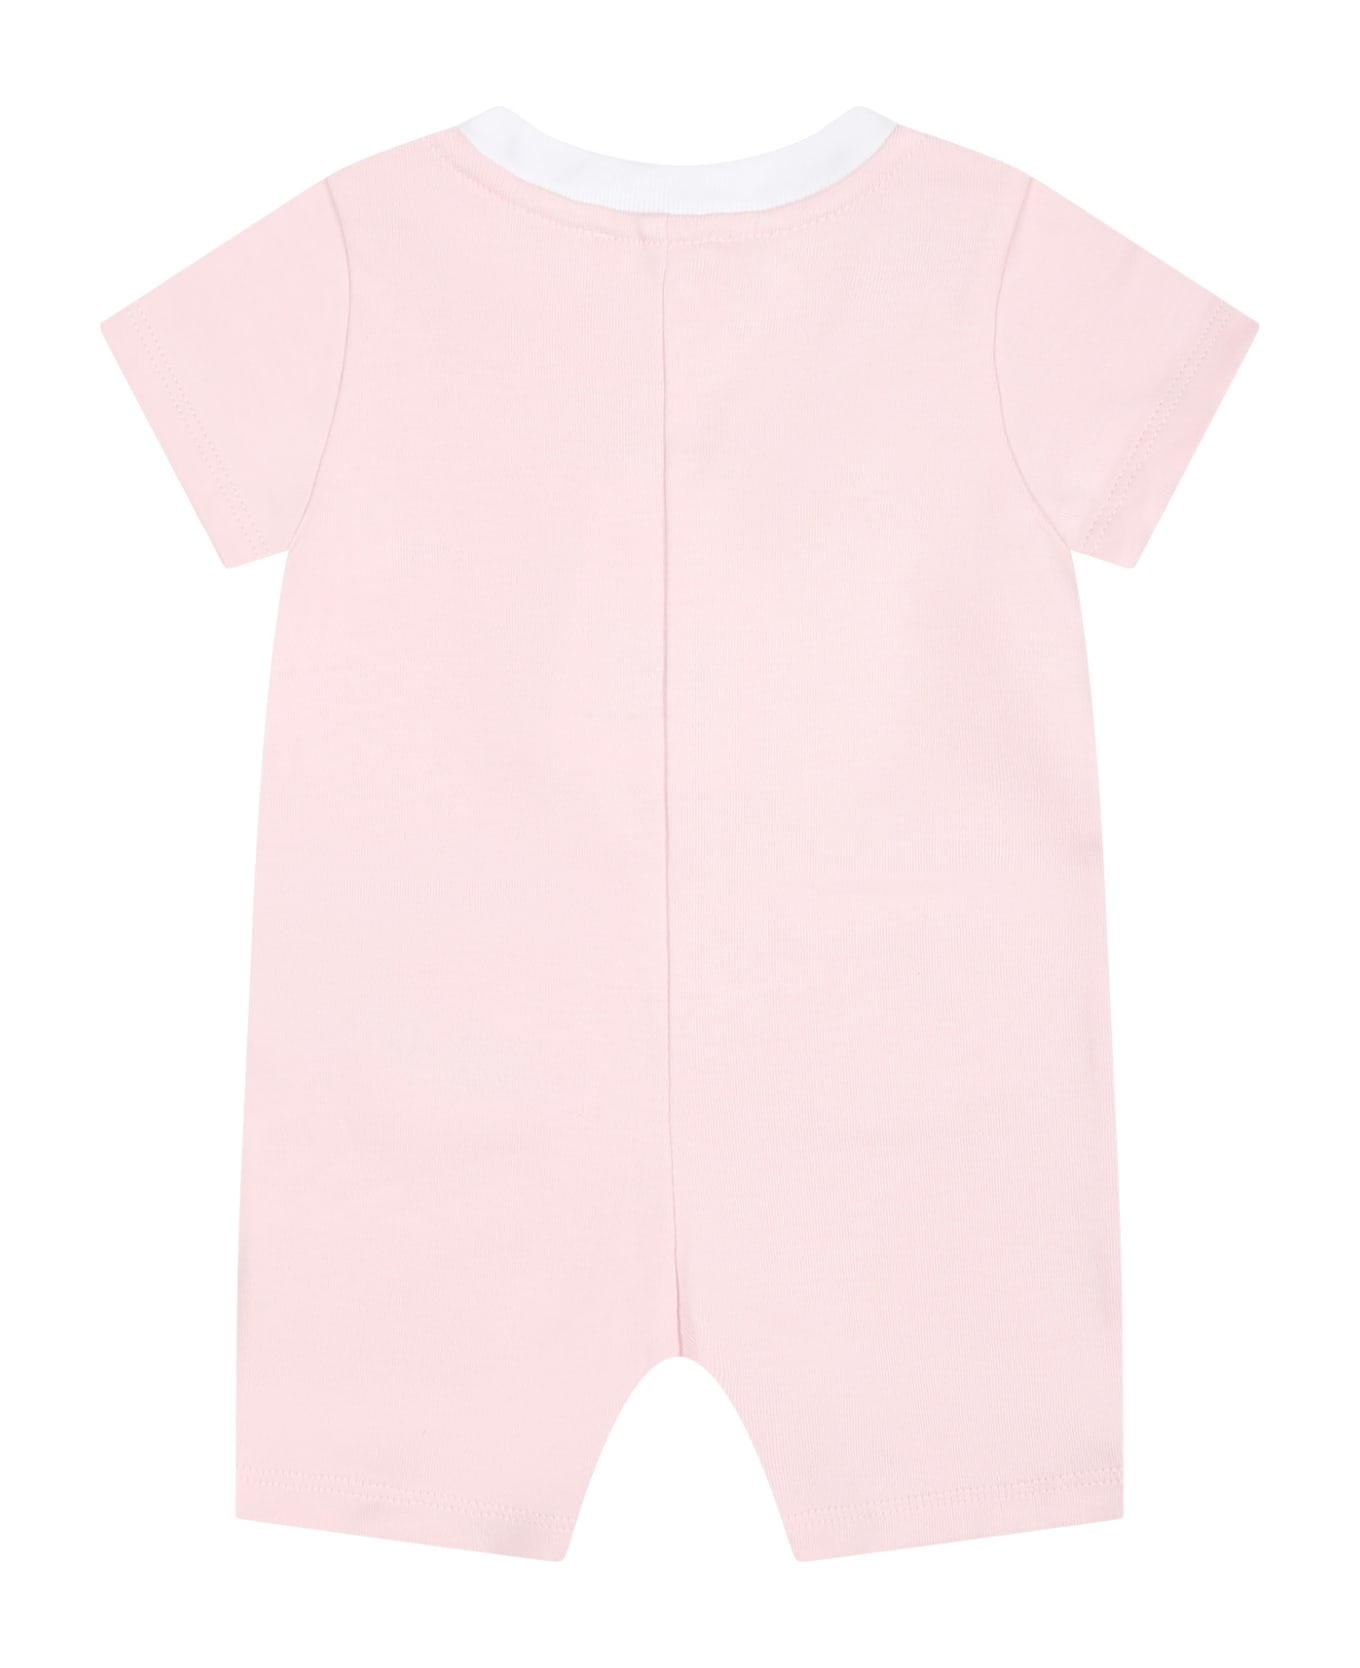 Givenchy Pink Romper For Baby Girl With Logo - Pink